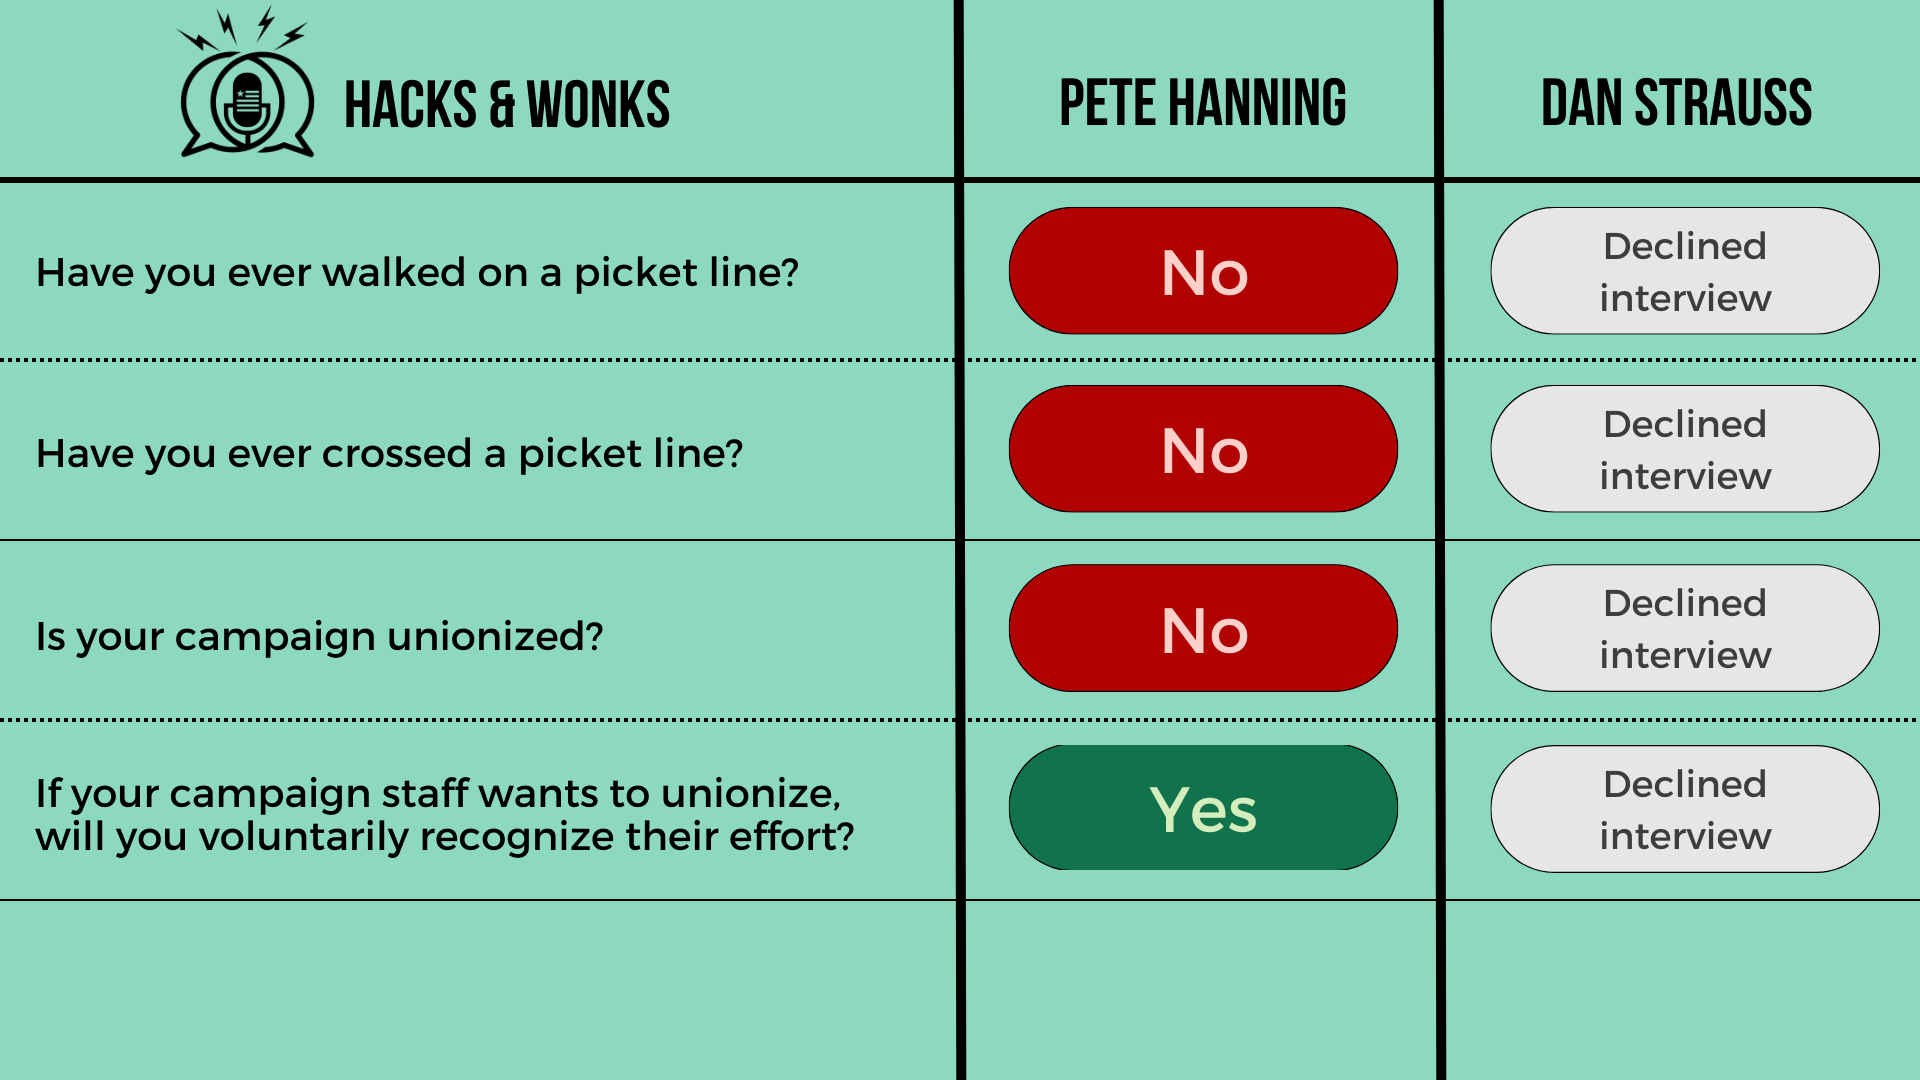 Q: Have you ever walked on a picket line? Pete Hanning: No, Dan Strauss: Declined interview  Q: Have you ever crossed a picket line? Pete Hanning: No, Dan Strauss: Declined interview  Q: Is your campaign unionized? Pete Hanning: No, Dan Strauss: Decl